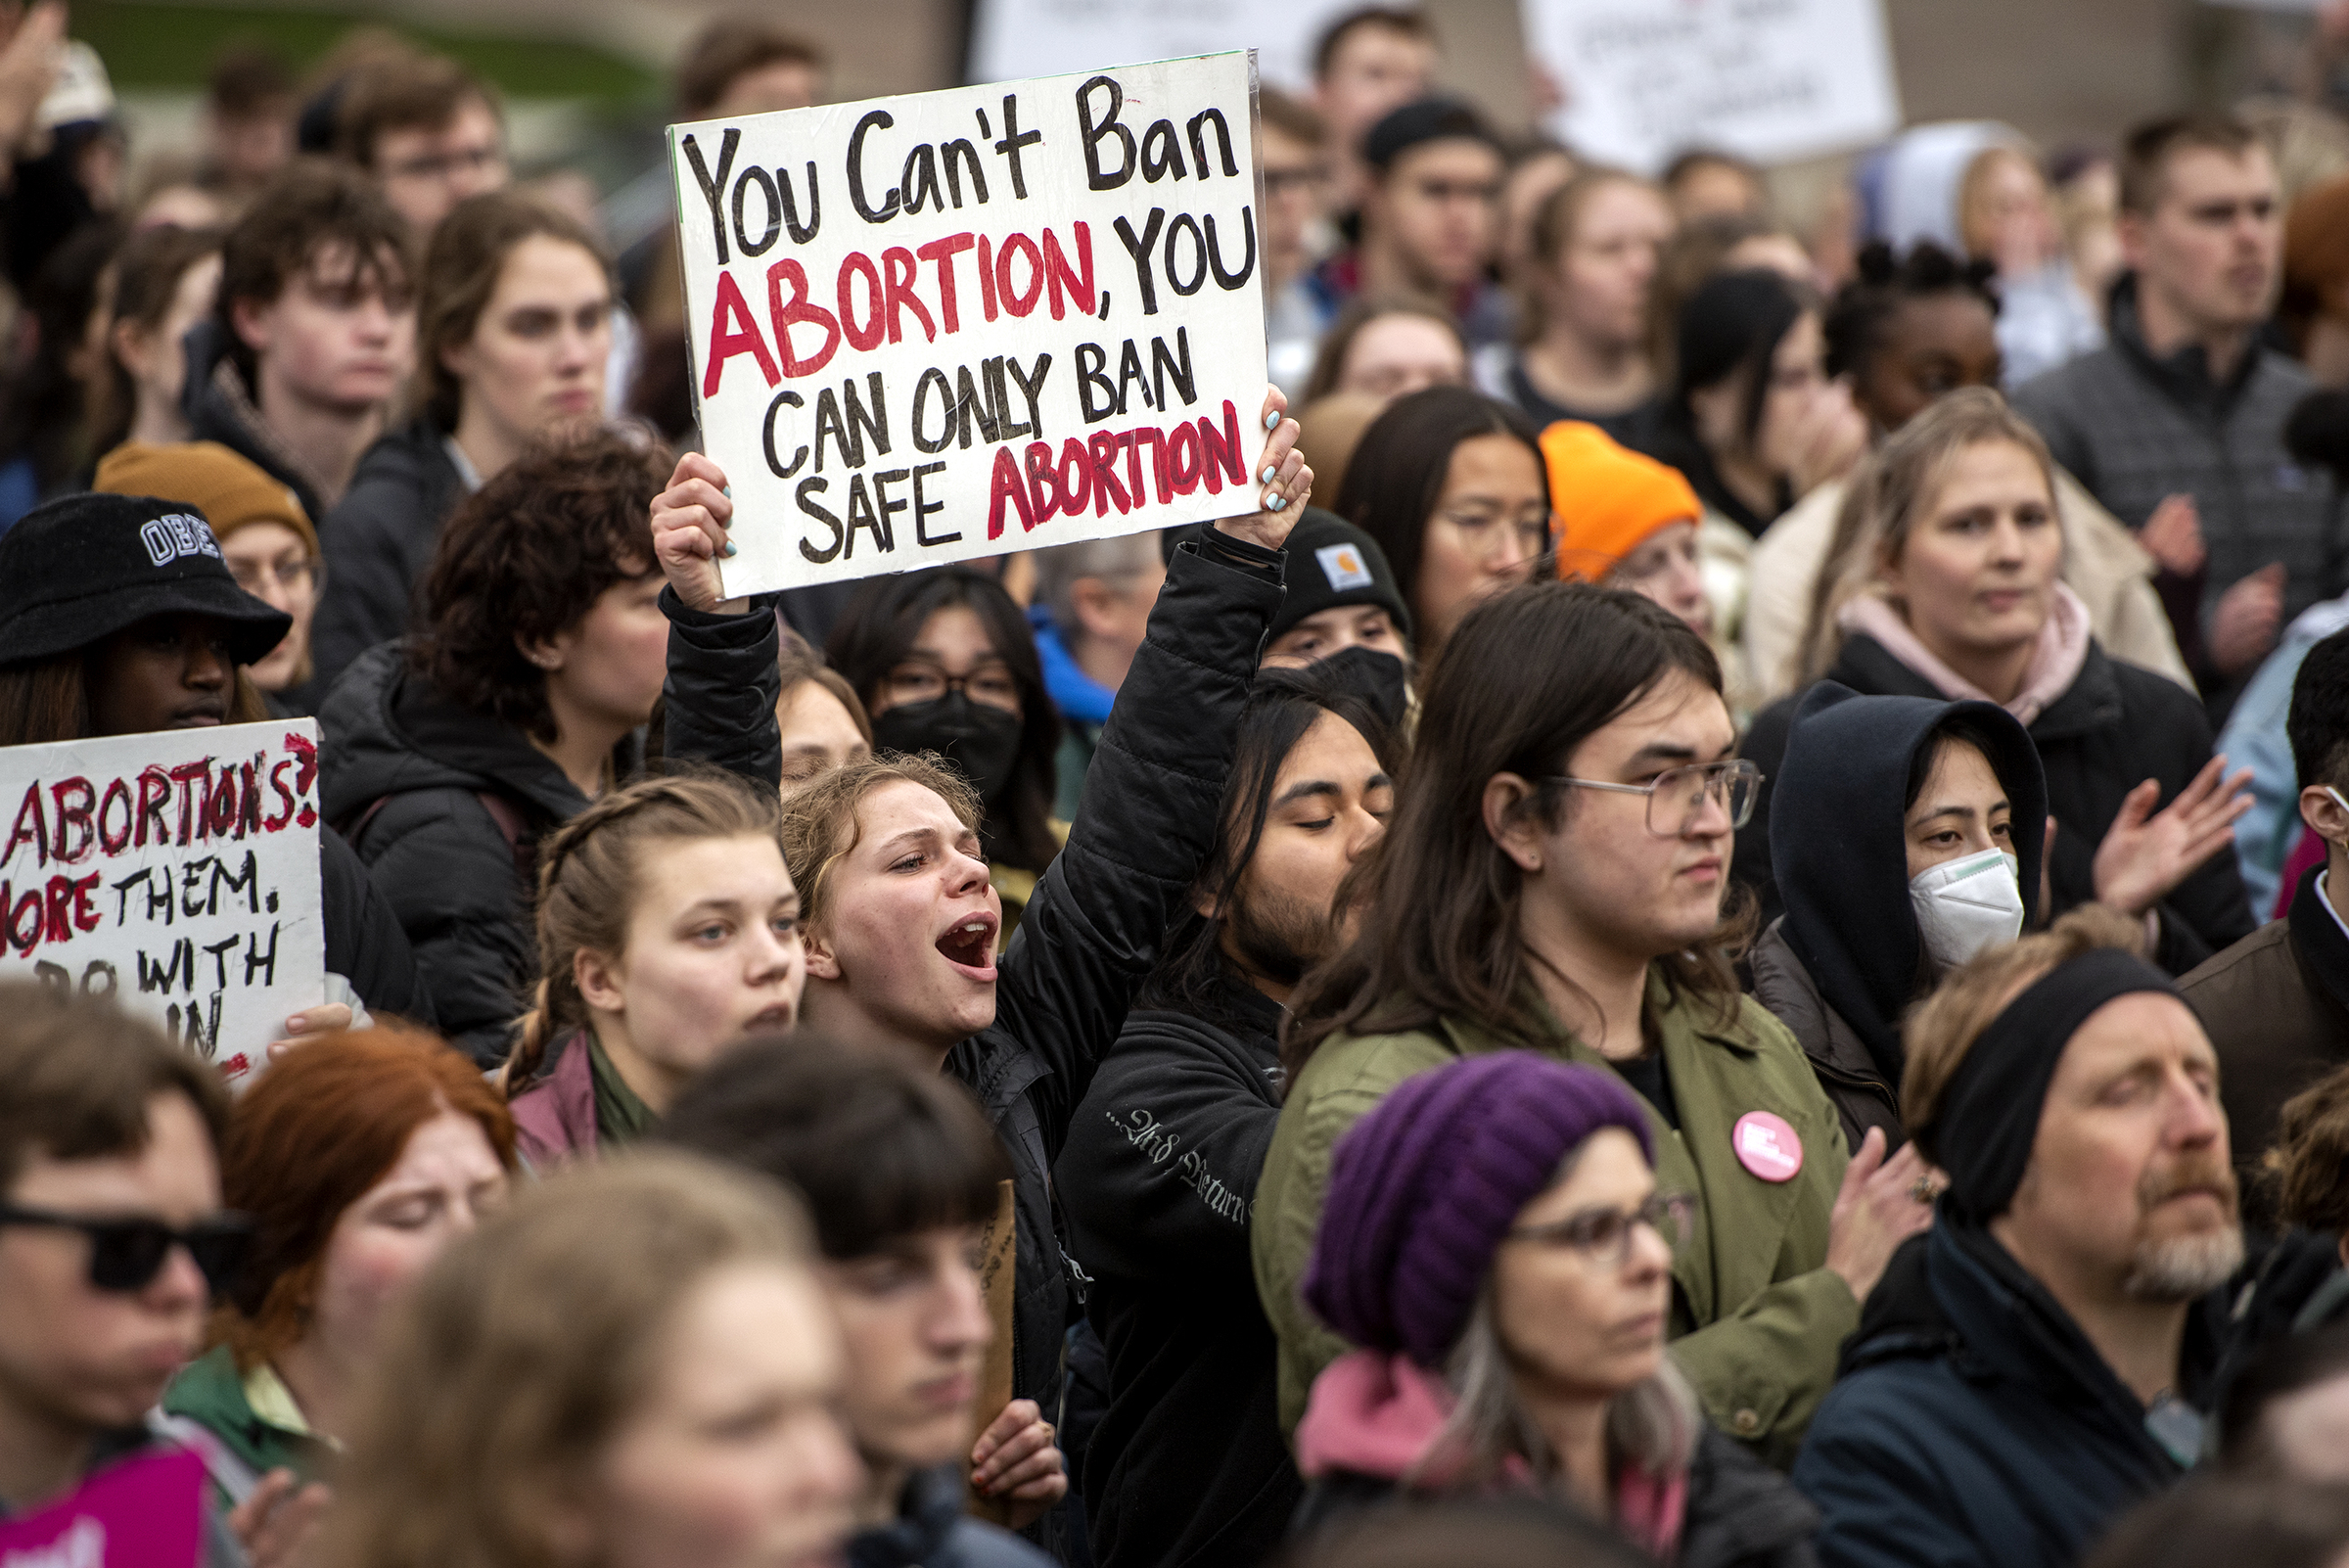 Here’s what to know about abortion access in post-Roe Wisconsin